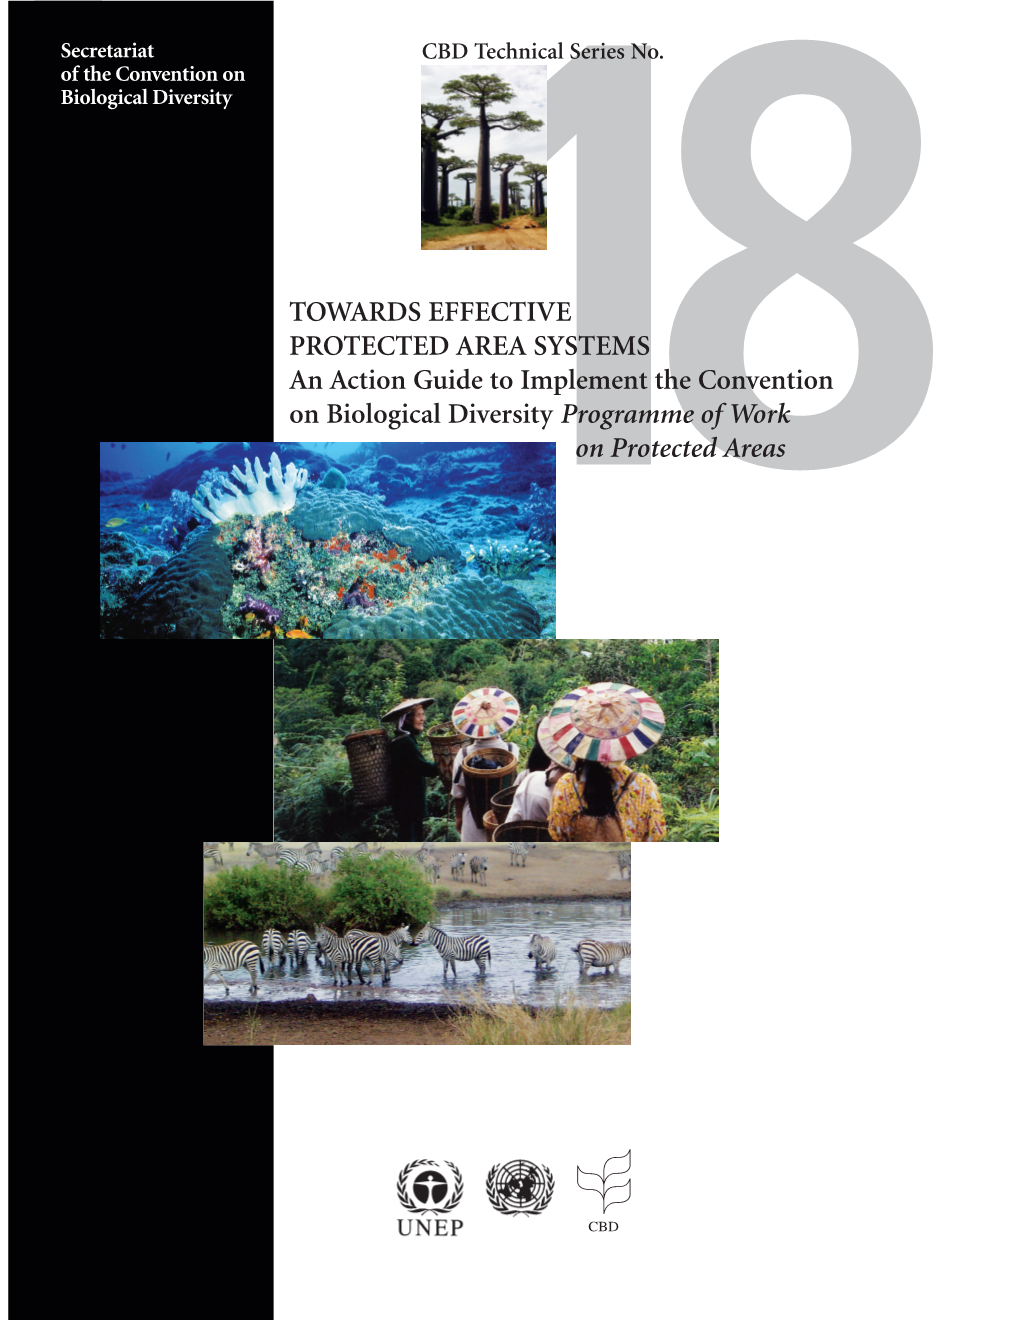 Towards Effective Protected Area Systems